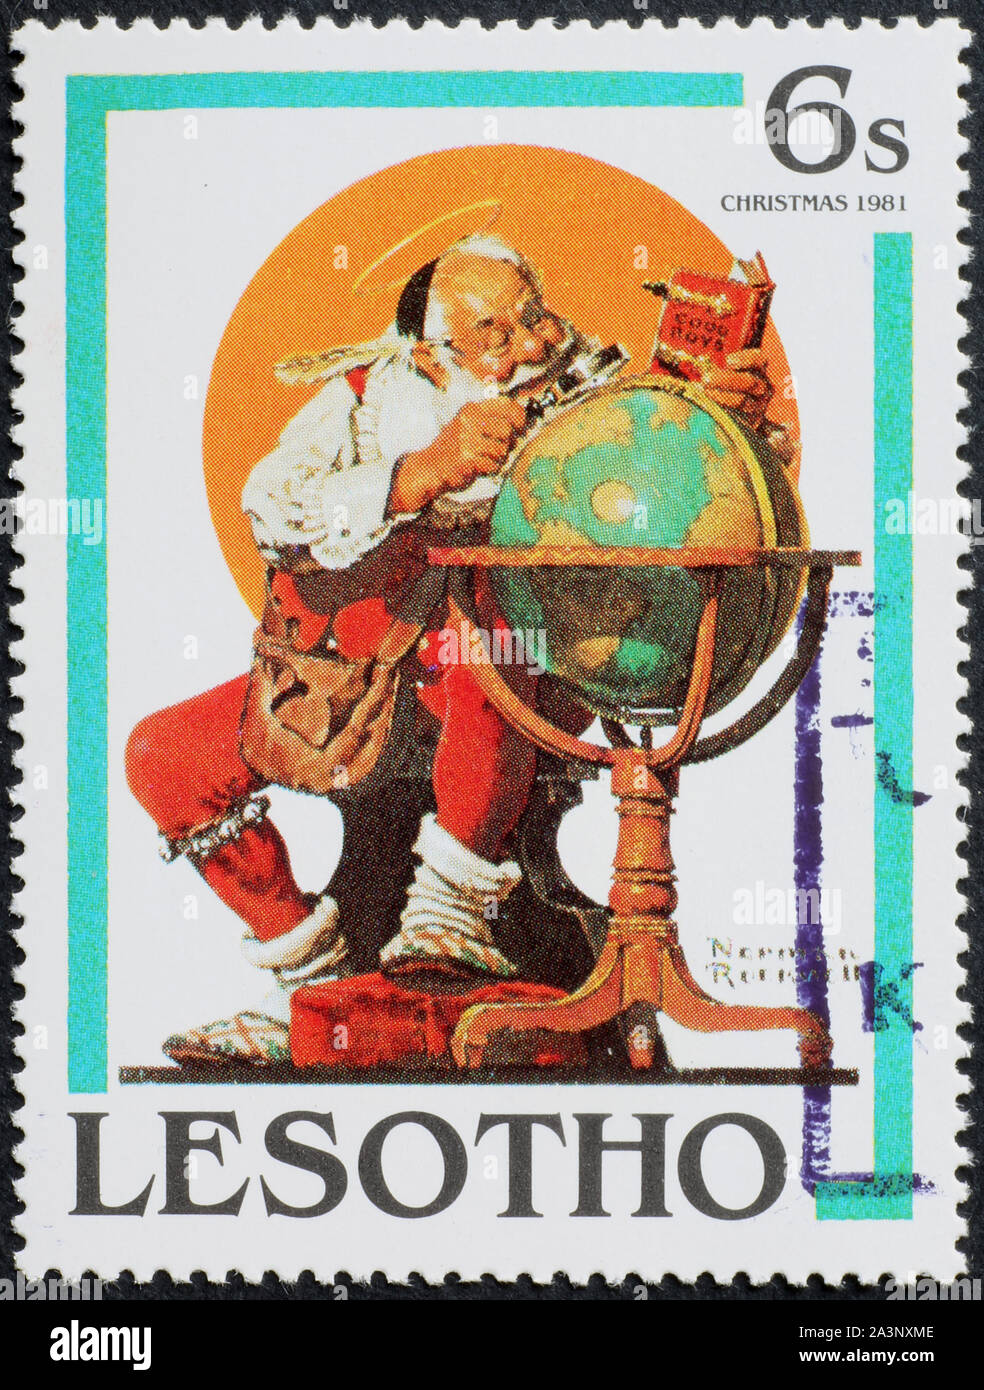 Santa Claus studying globe by Norman Rockwell on stamp Stock Photo